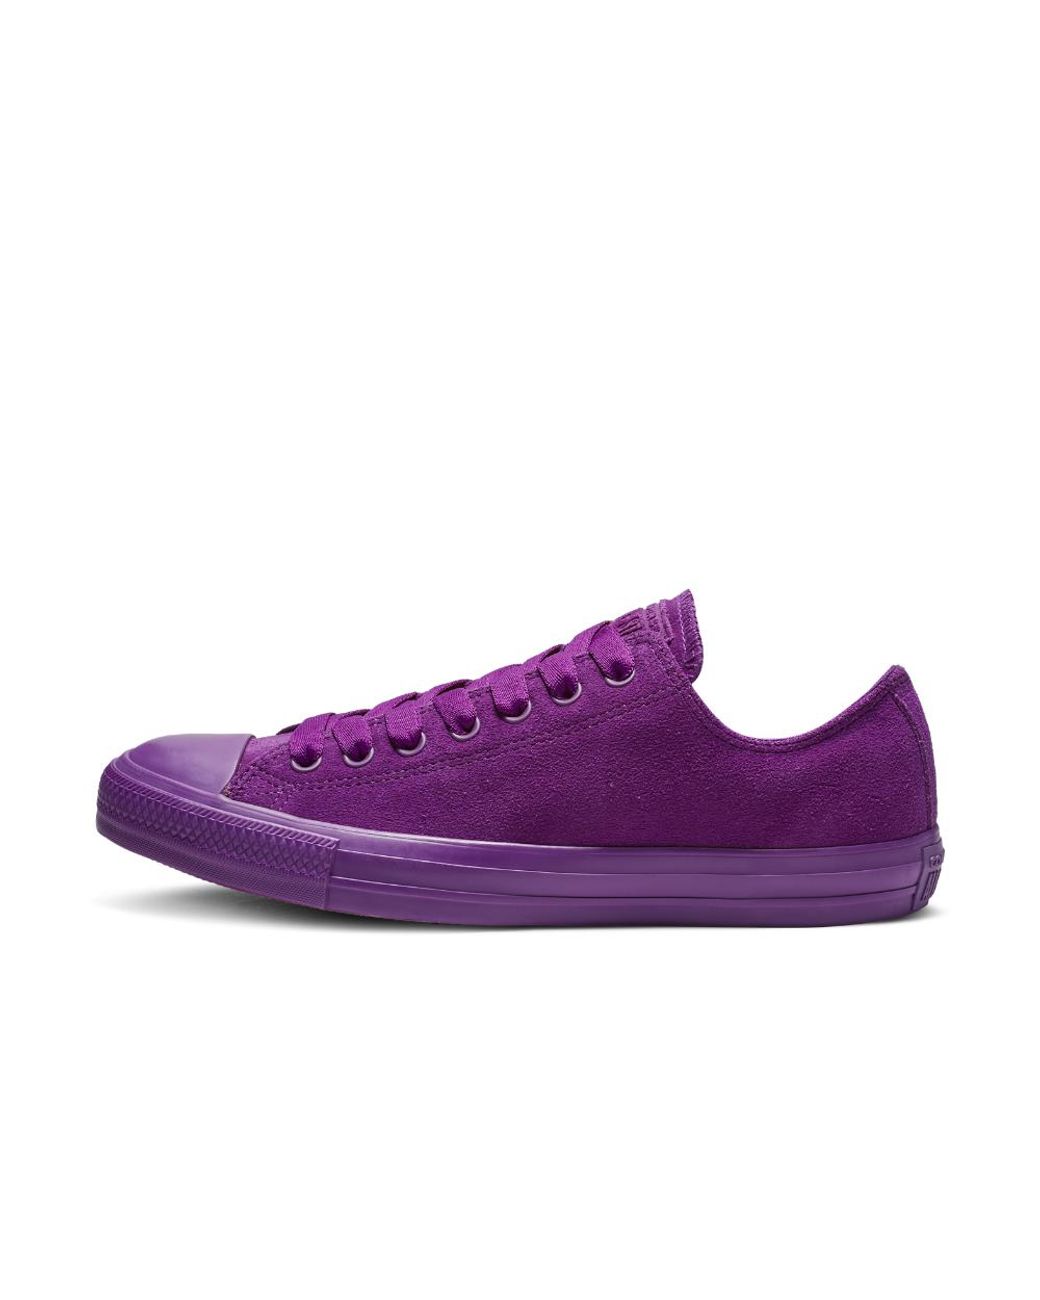 Converse Chuck Taylor All Star Suede Mono Color Low Top Women's Shoe in  Purple | Lyst